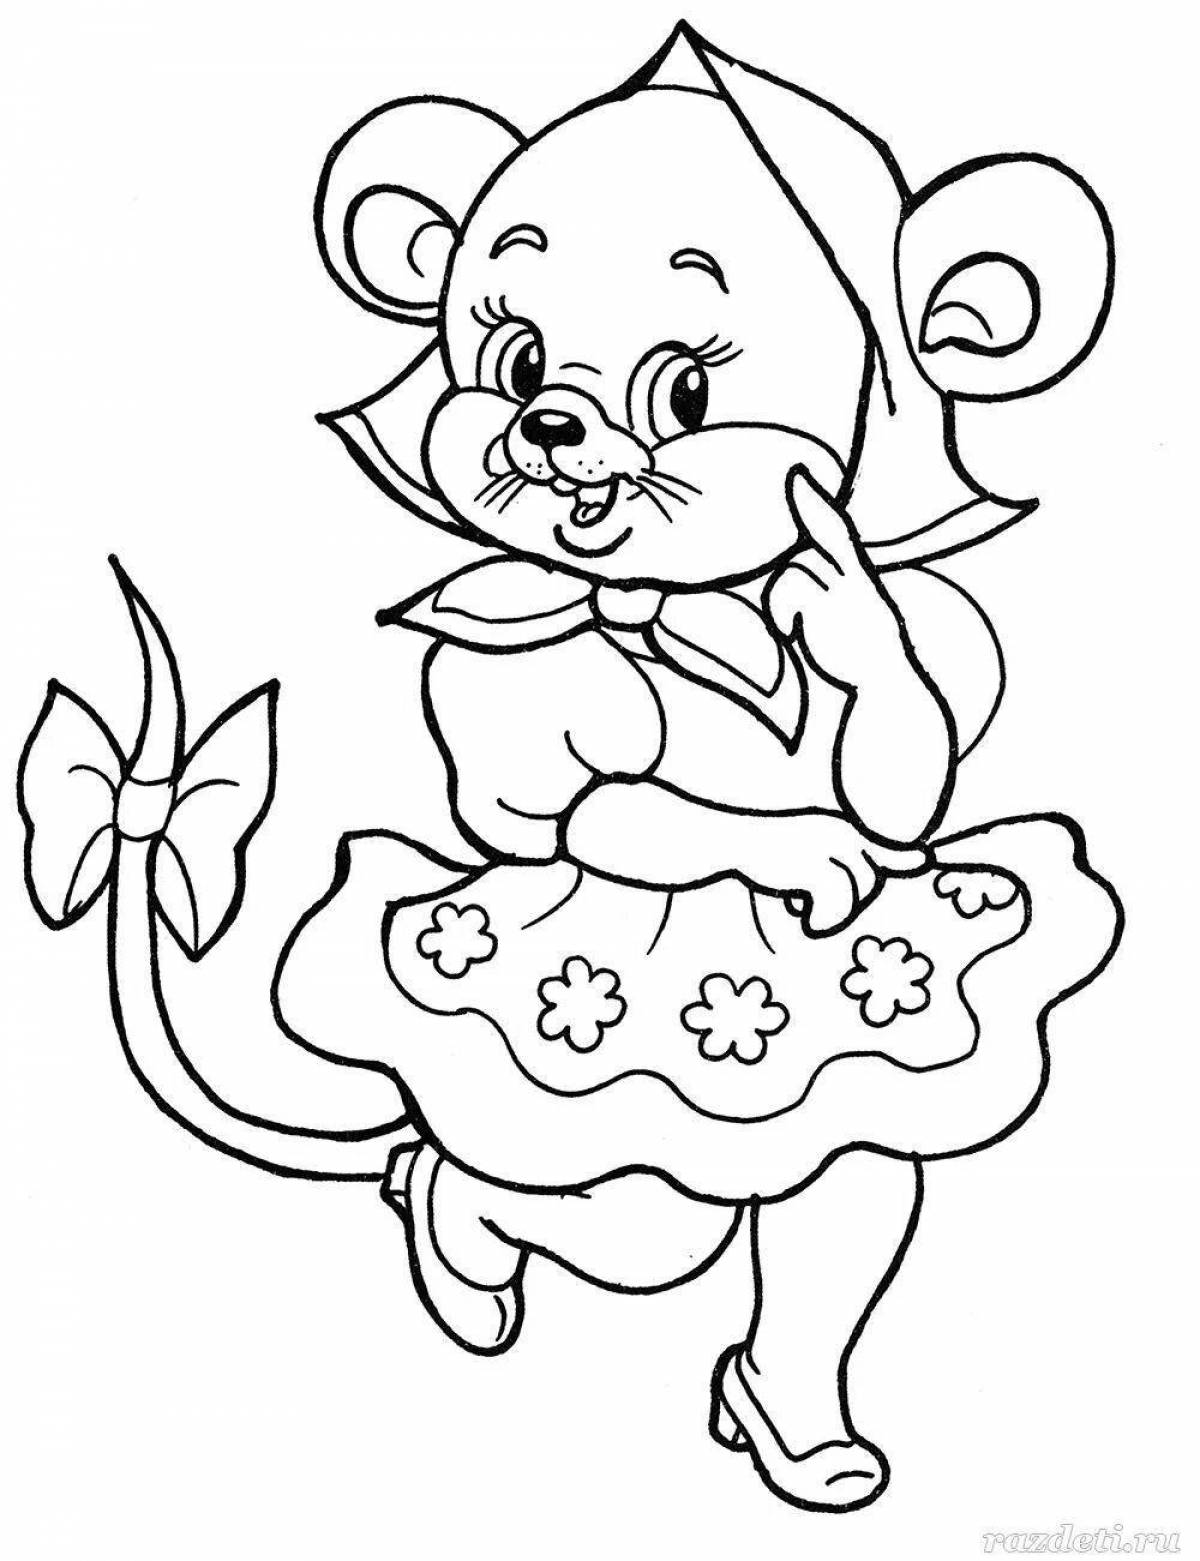 Outstanding mouse coloring page for 4-5 year olds